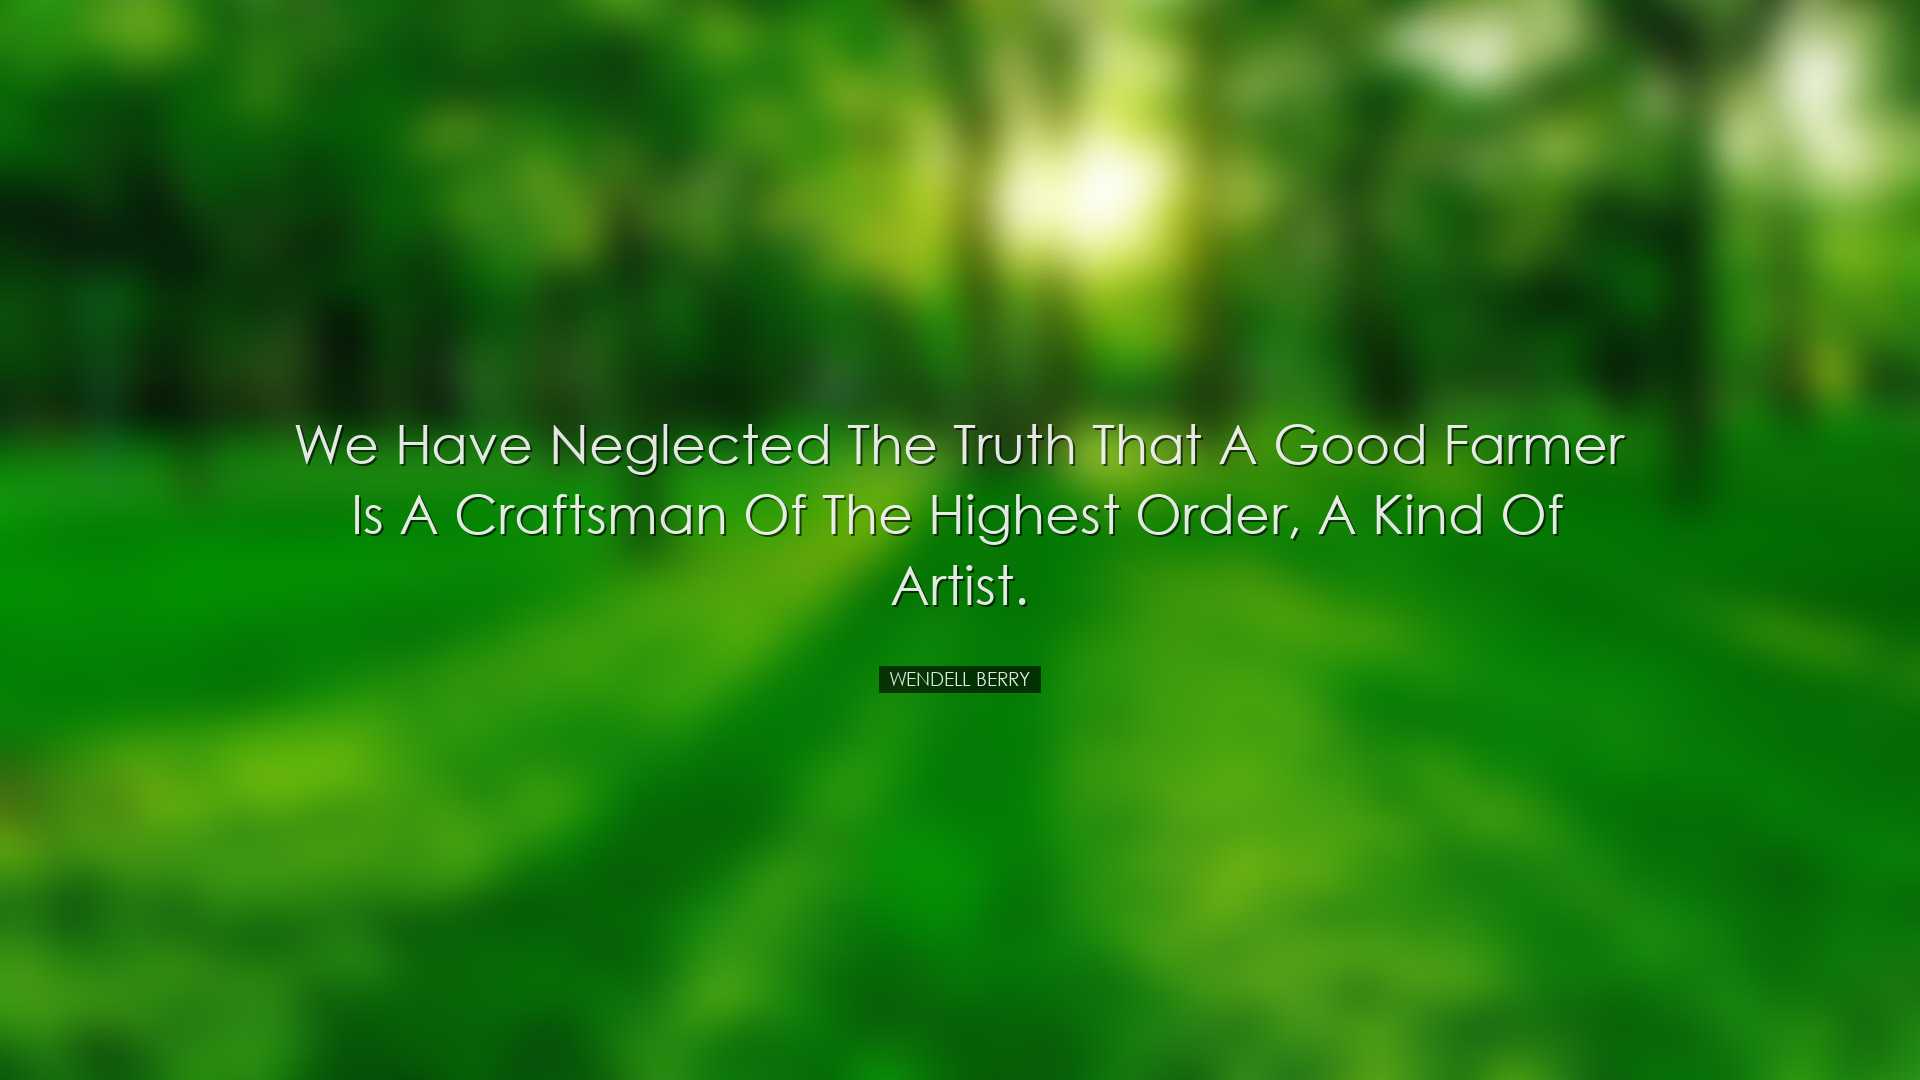 We have neglected the truth that a good farmer is a craftsman of t